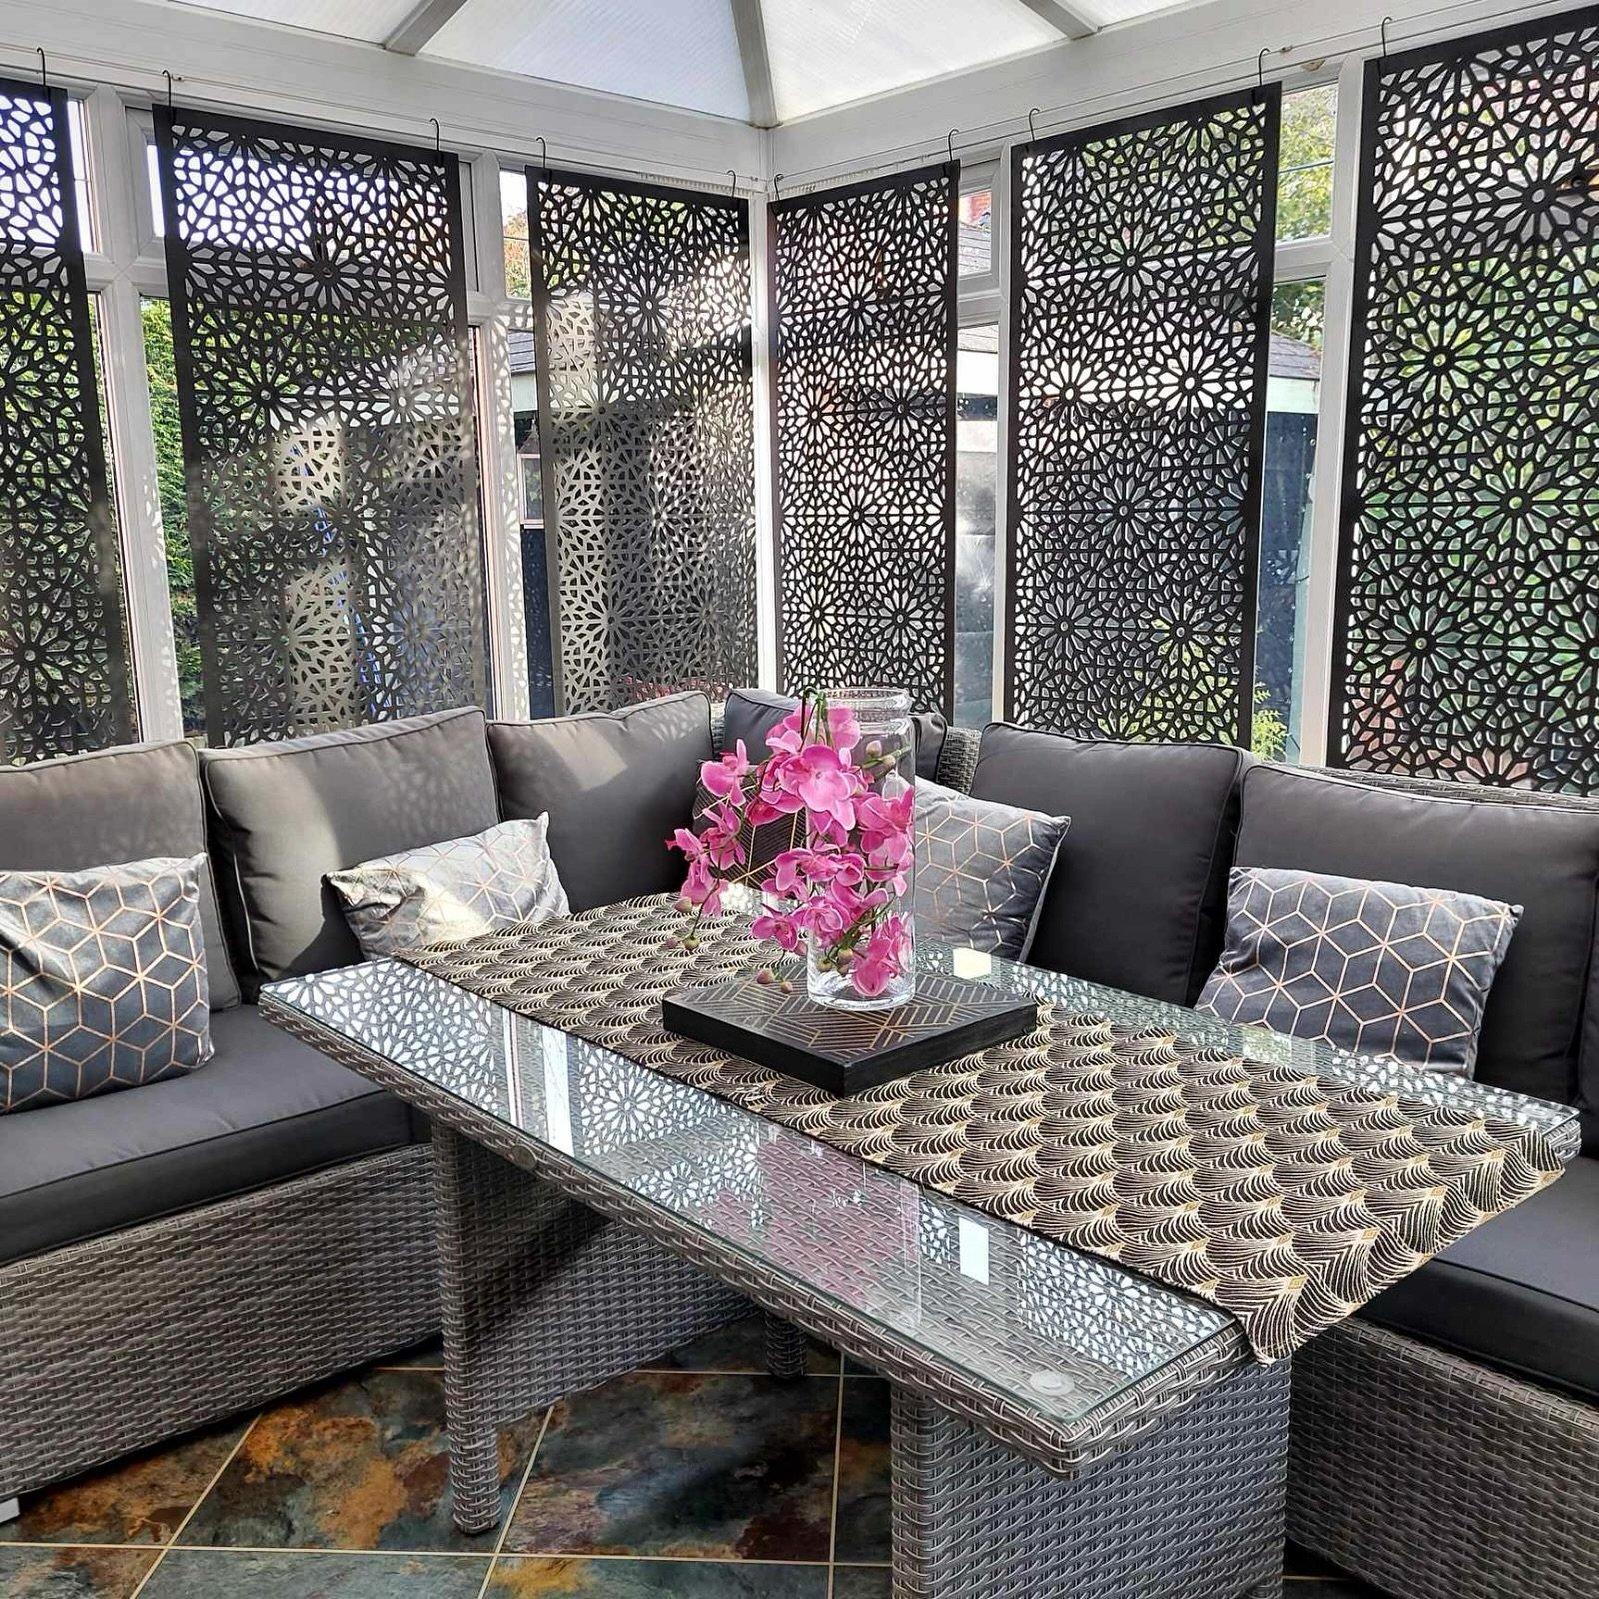 Such a creative use of our large Moucharabiya screens! 

We just love what our client has done here, using our decorative screens as window coverings for enhanced privacy while still allowing light to pass through their conservatory. 

Hurry and get 